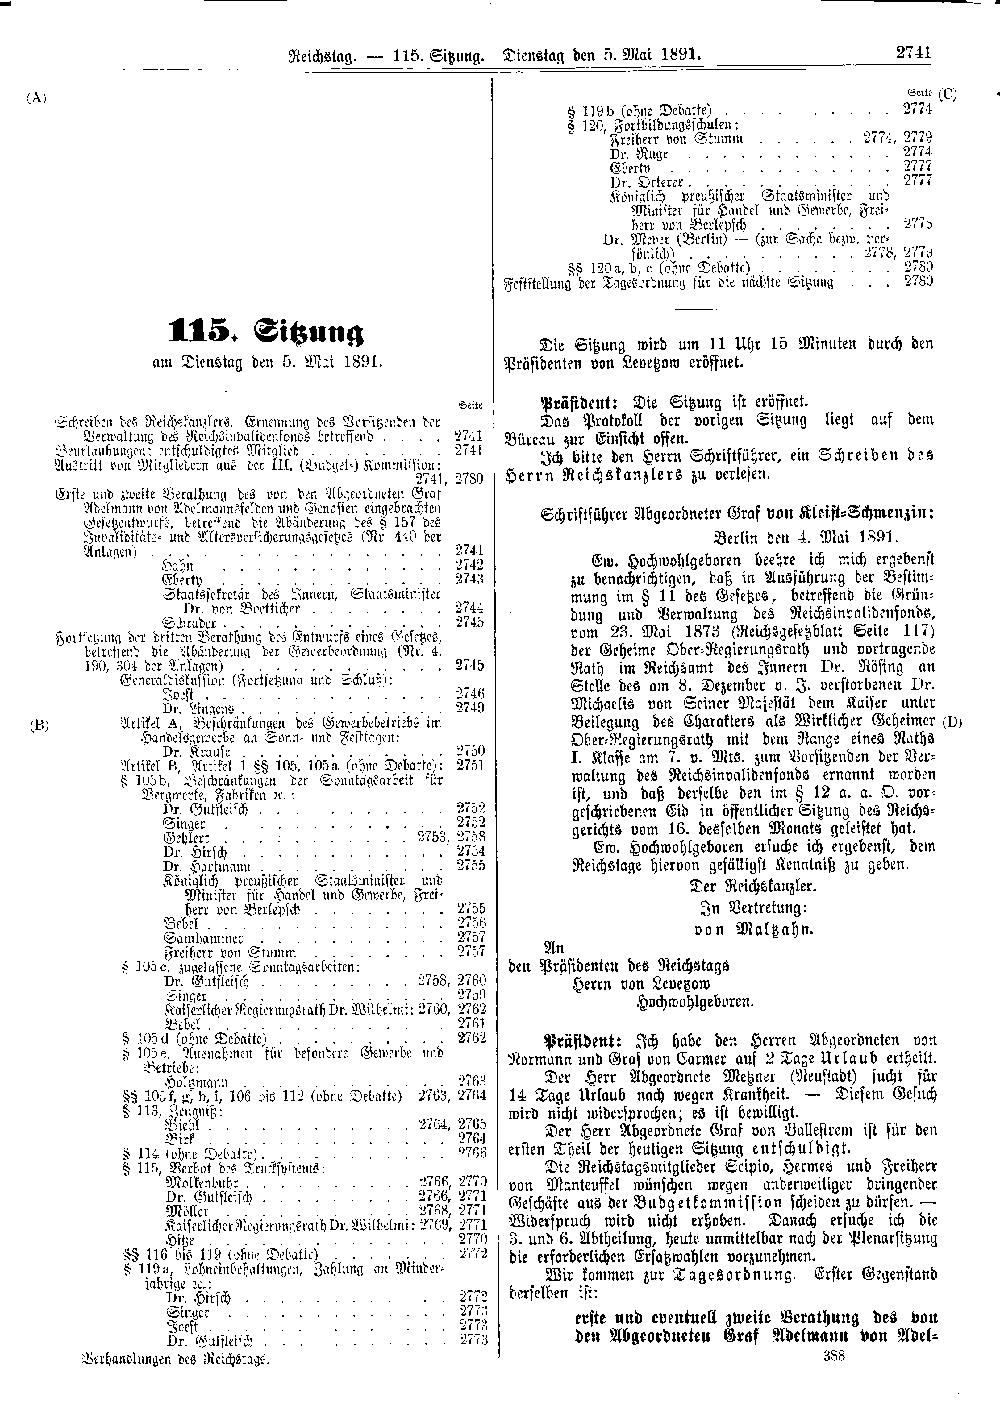 Scan of page 2741